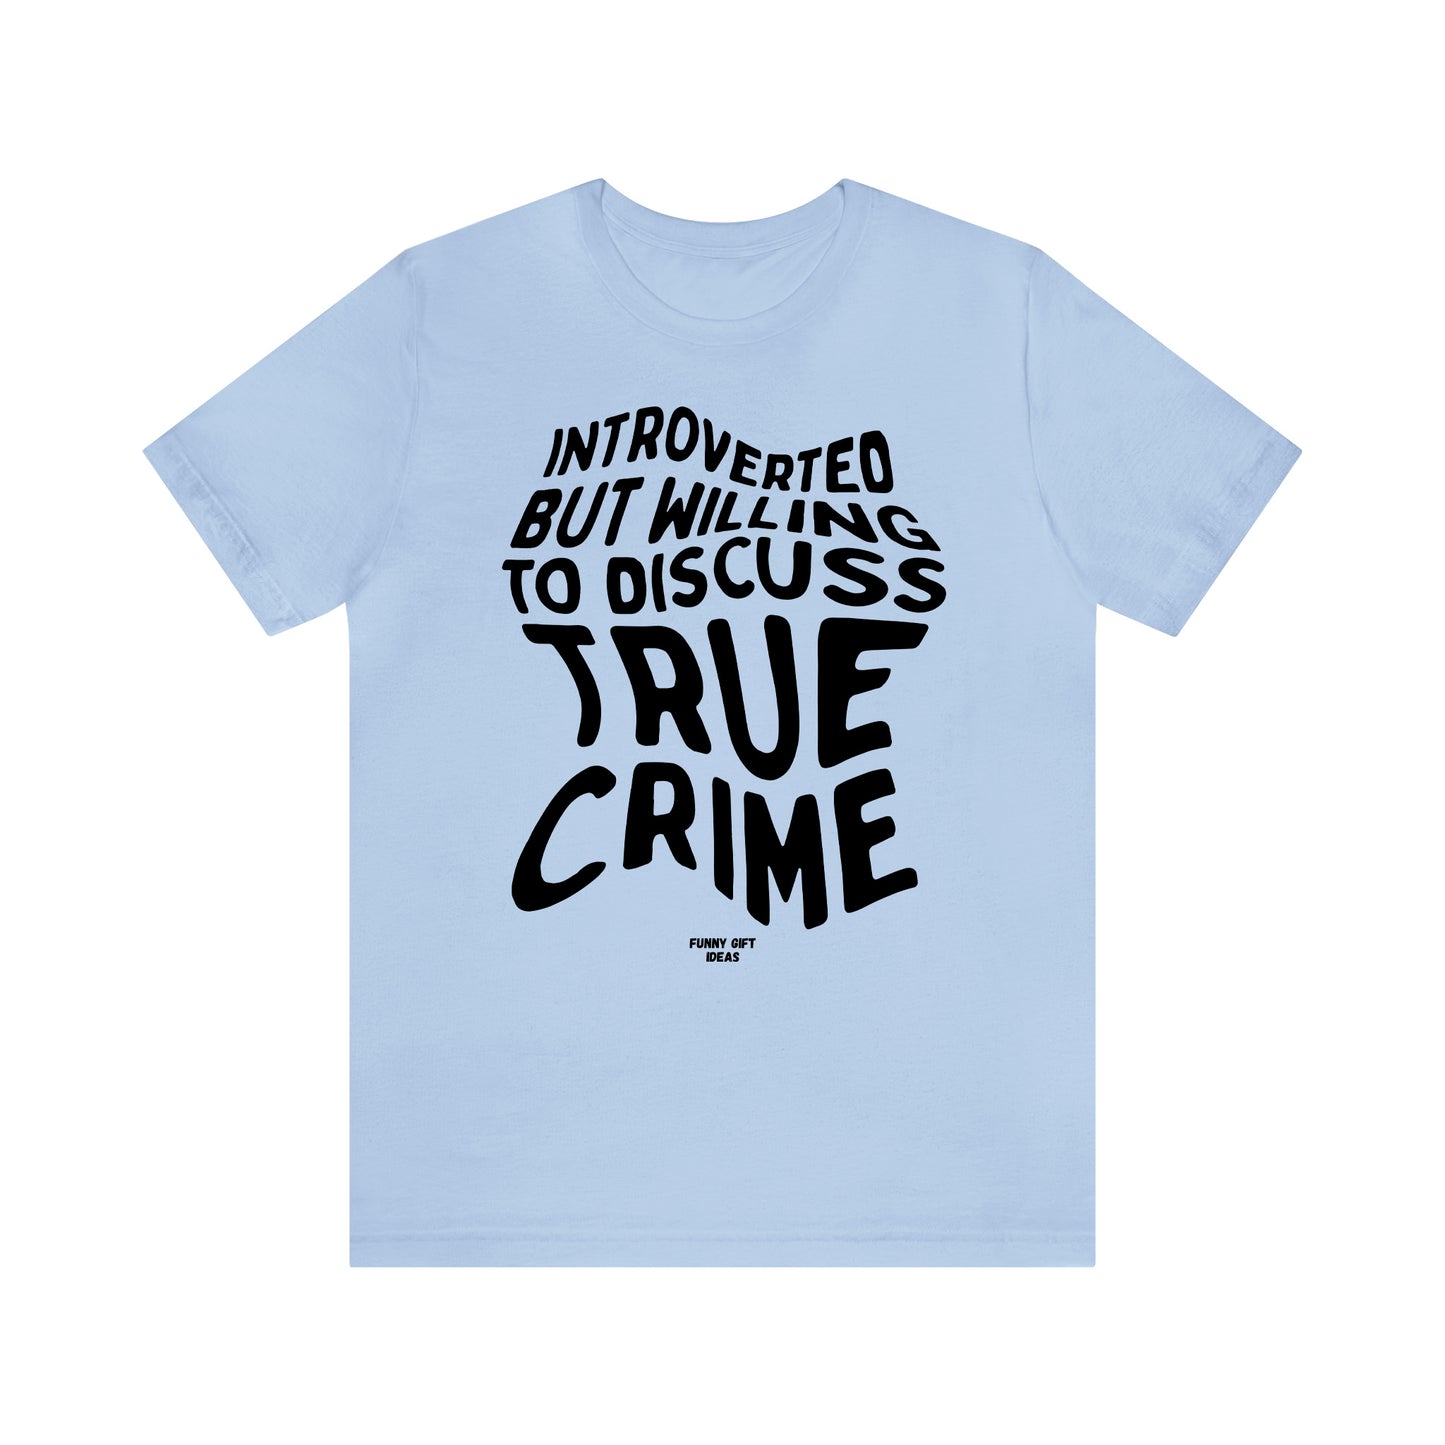 Funny Shirts for Women - Introverted but Willing to Discuss True Crime - Women's T Shirts